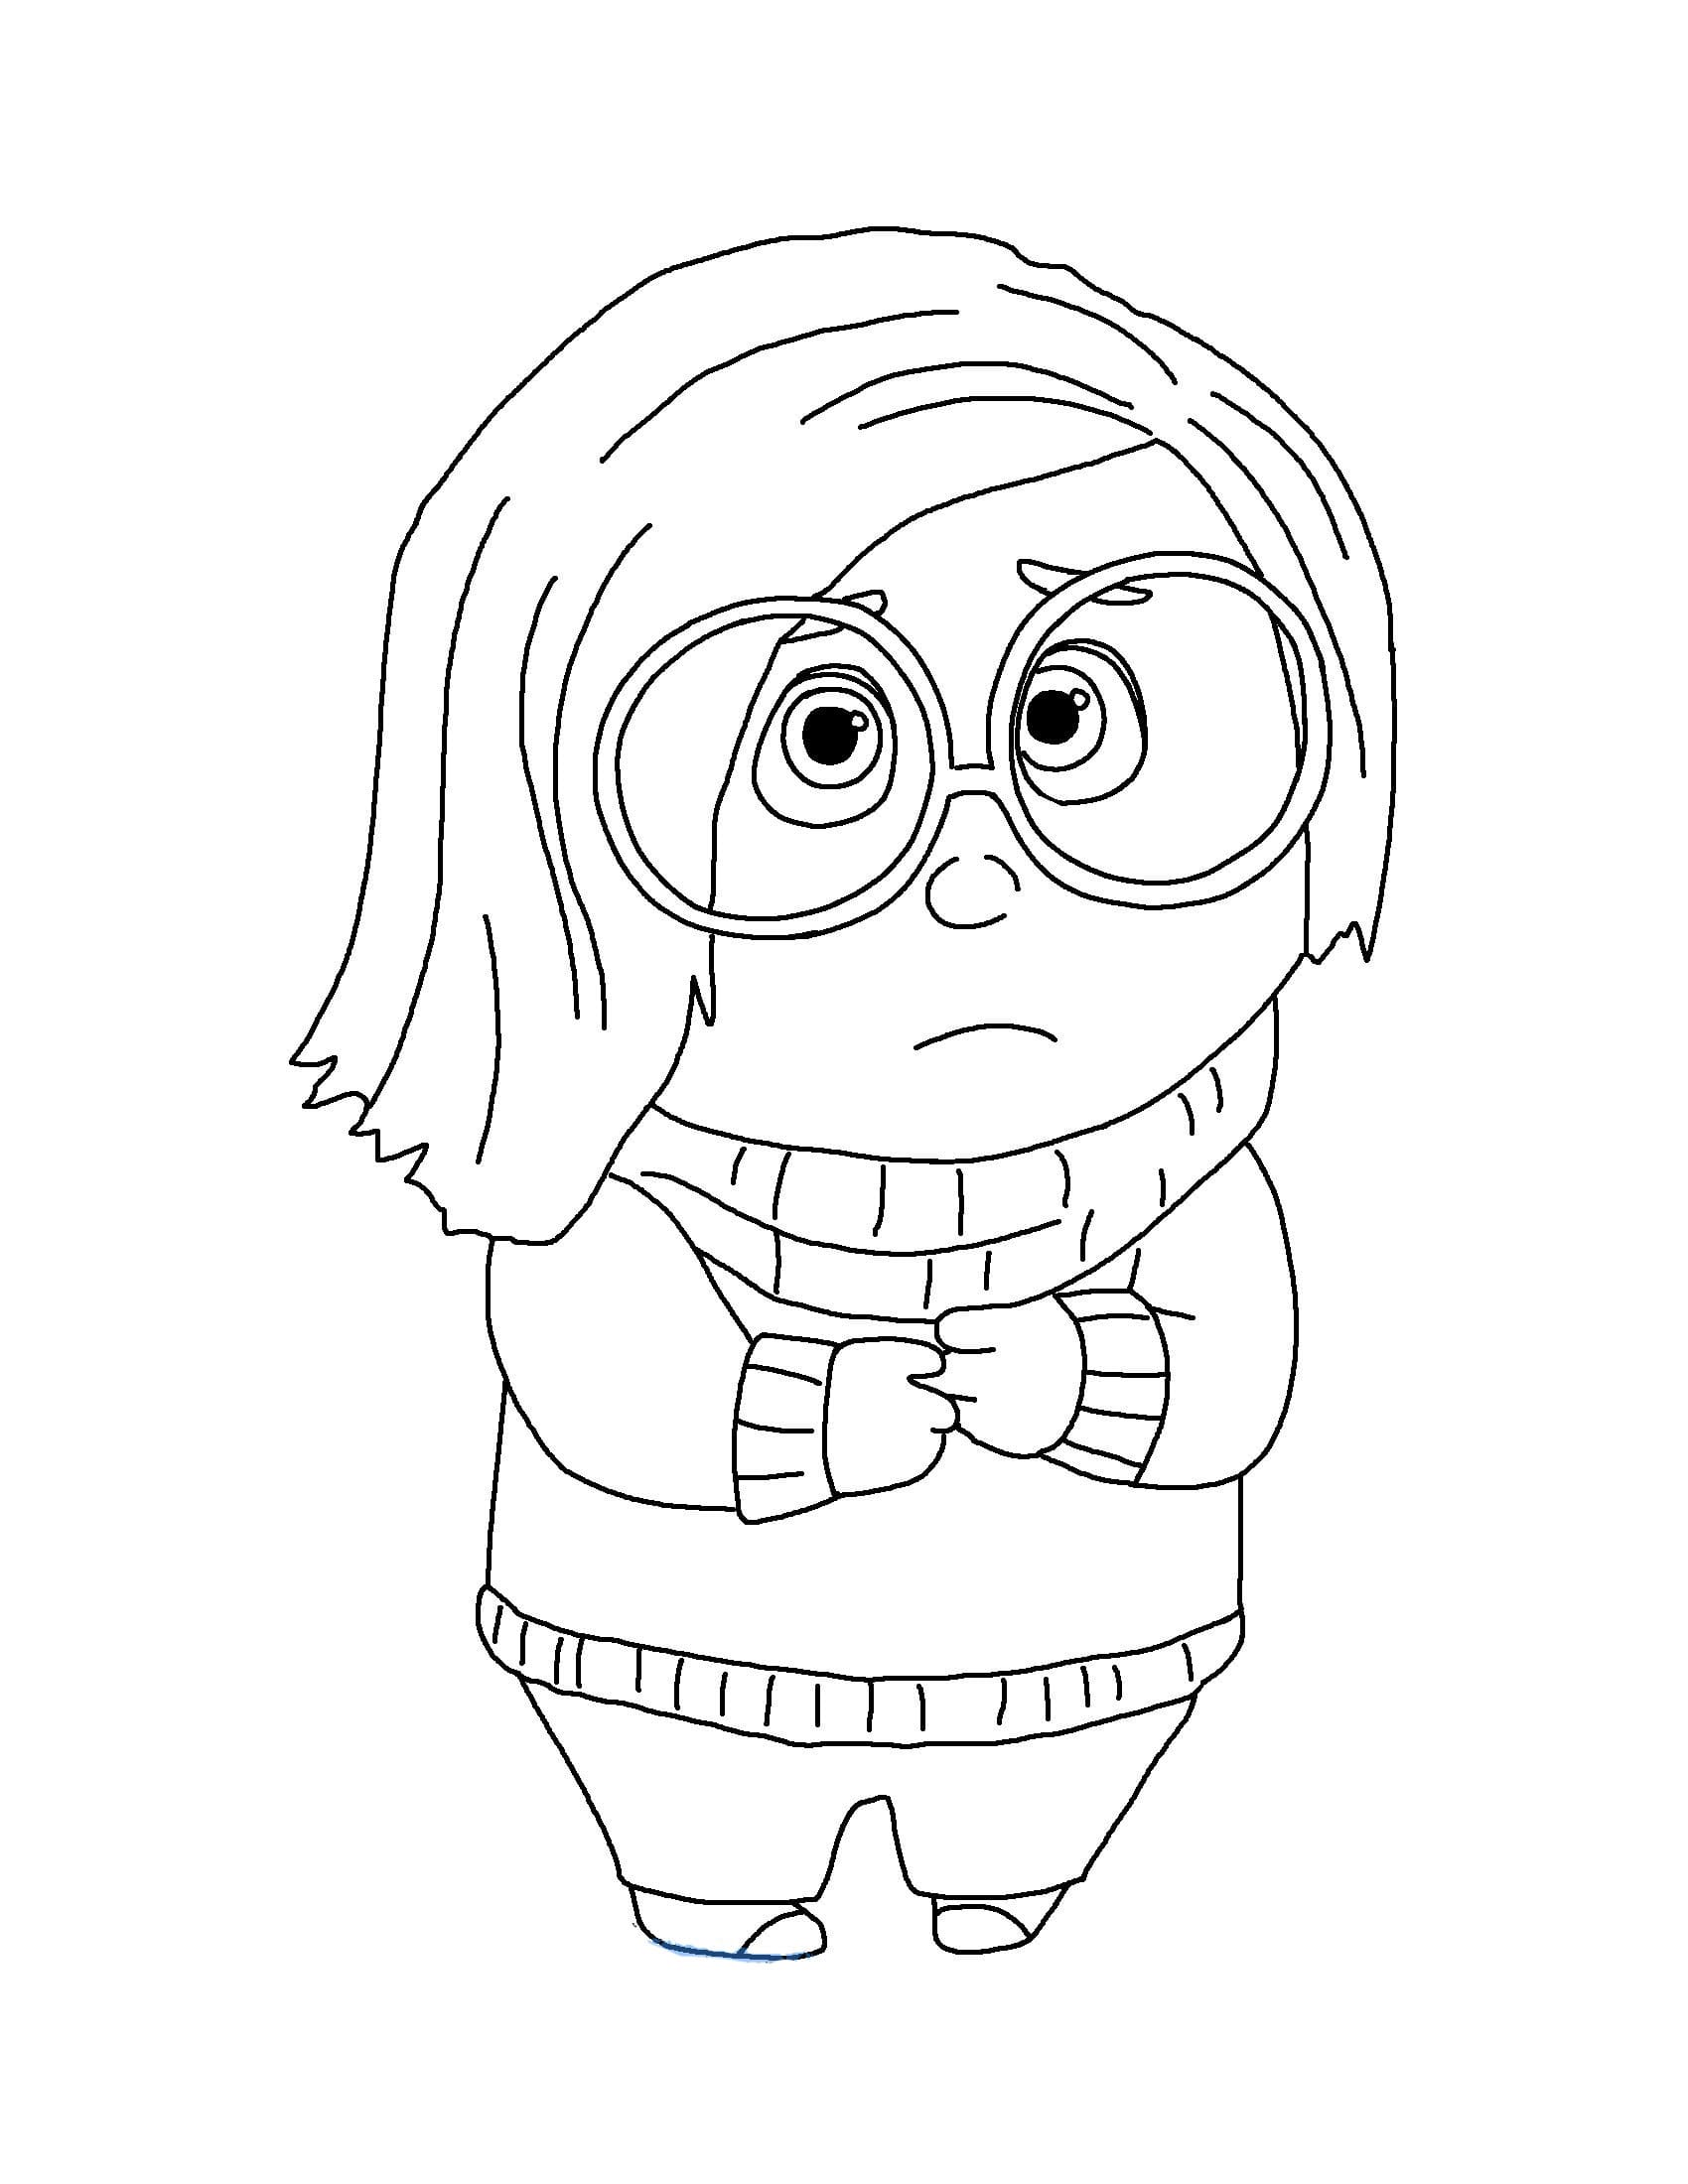 Free Sadness Image coloring page - Download, Print or Color Online for Free